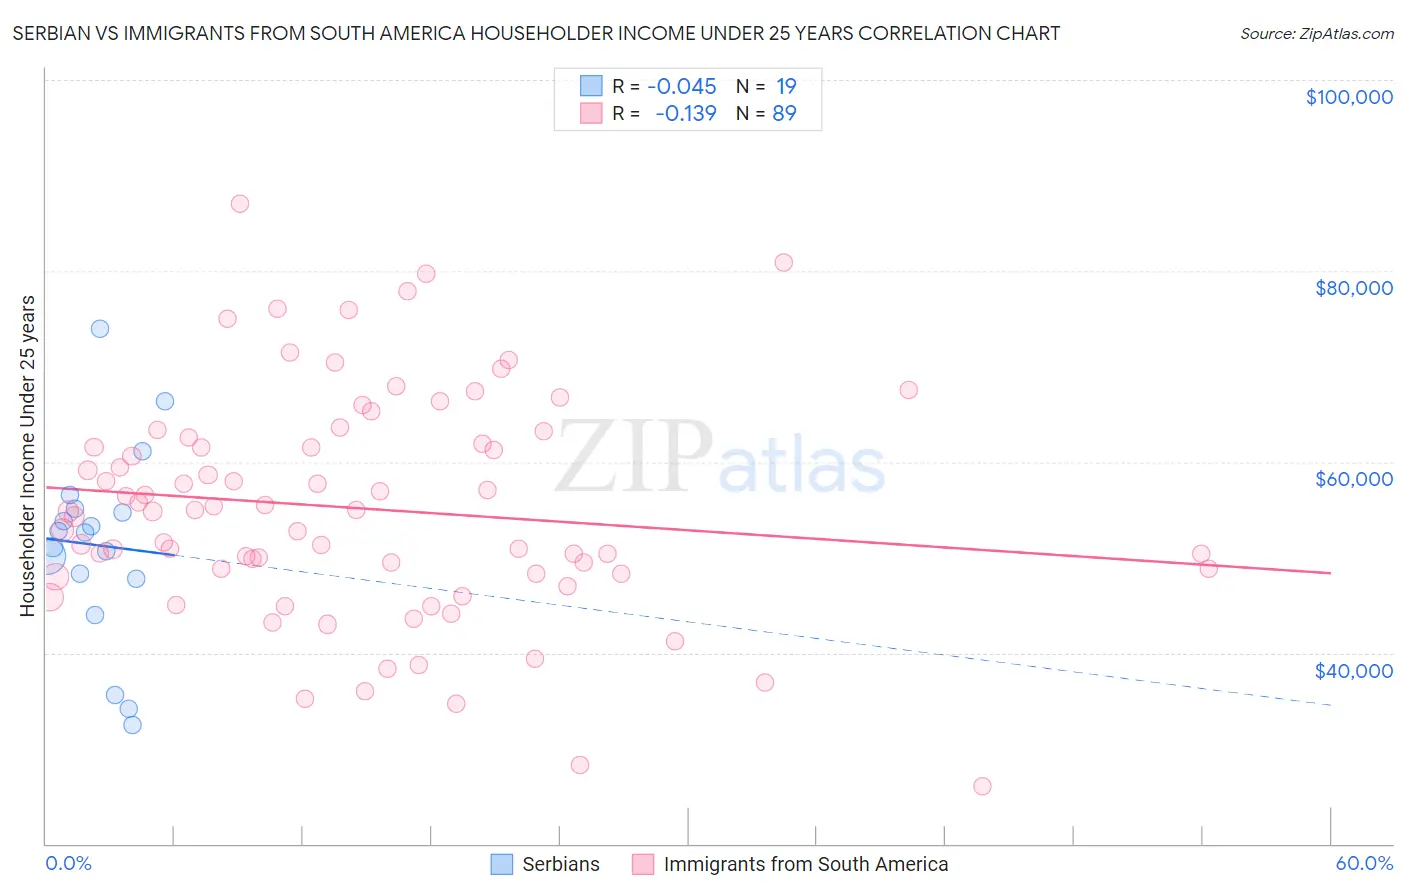 Serbian vs Immigrants from South America Householder Income Under 25 years